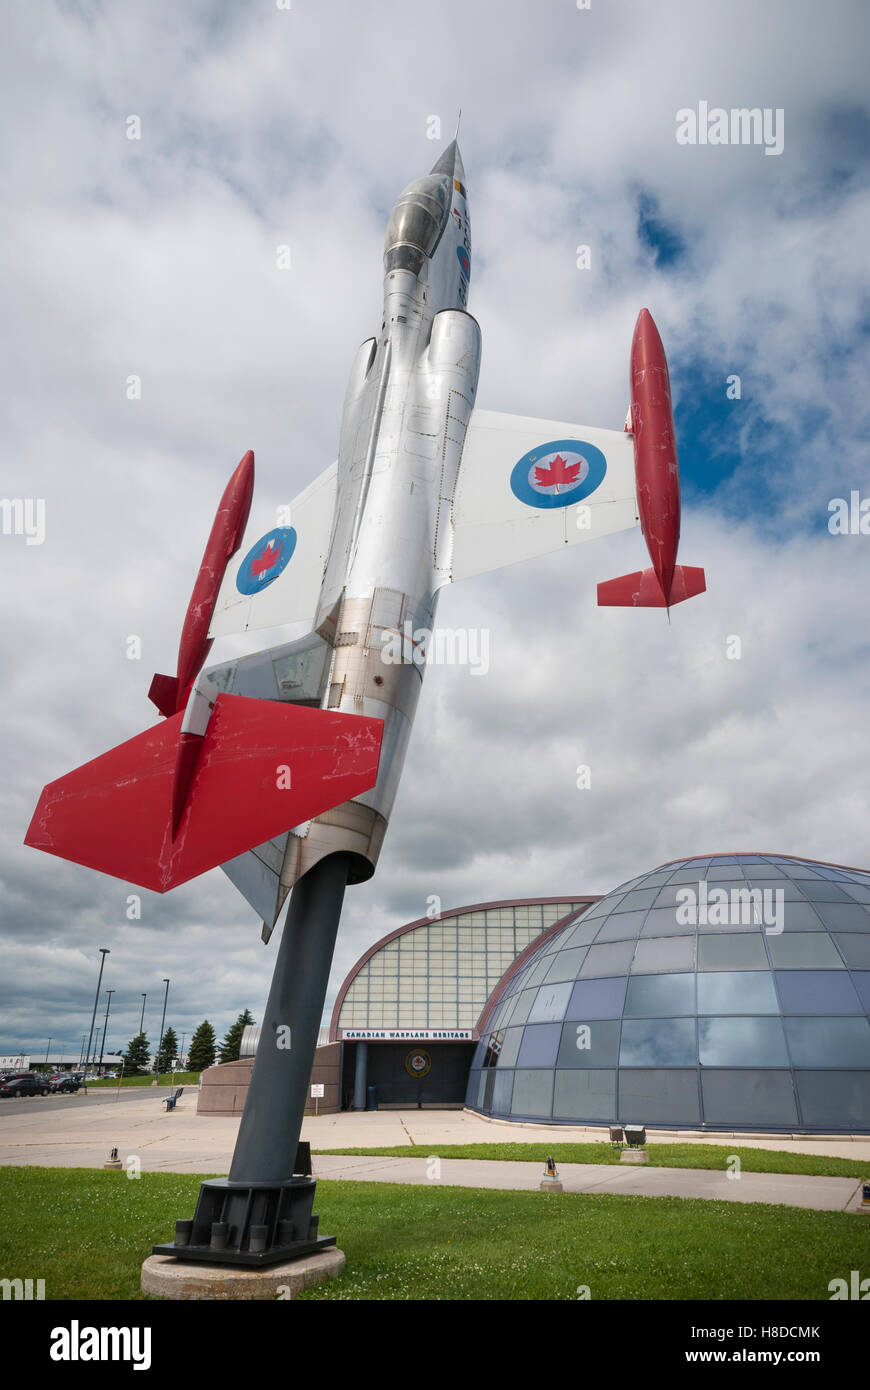 A Lockheed F-104 d Starfighter displayed on a pedestal outside the Canadian Warplane Museum in Hamilton Ontario Canada Stock Photo